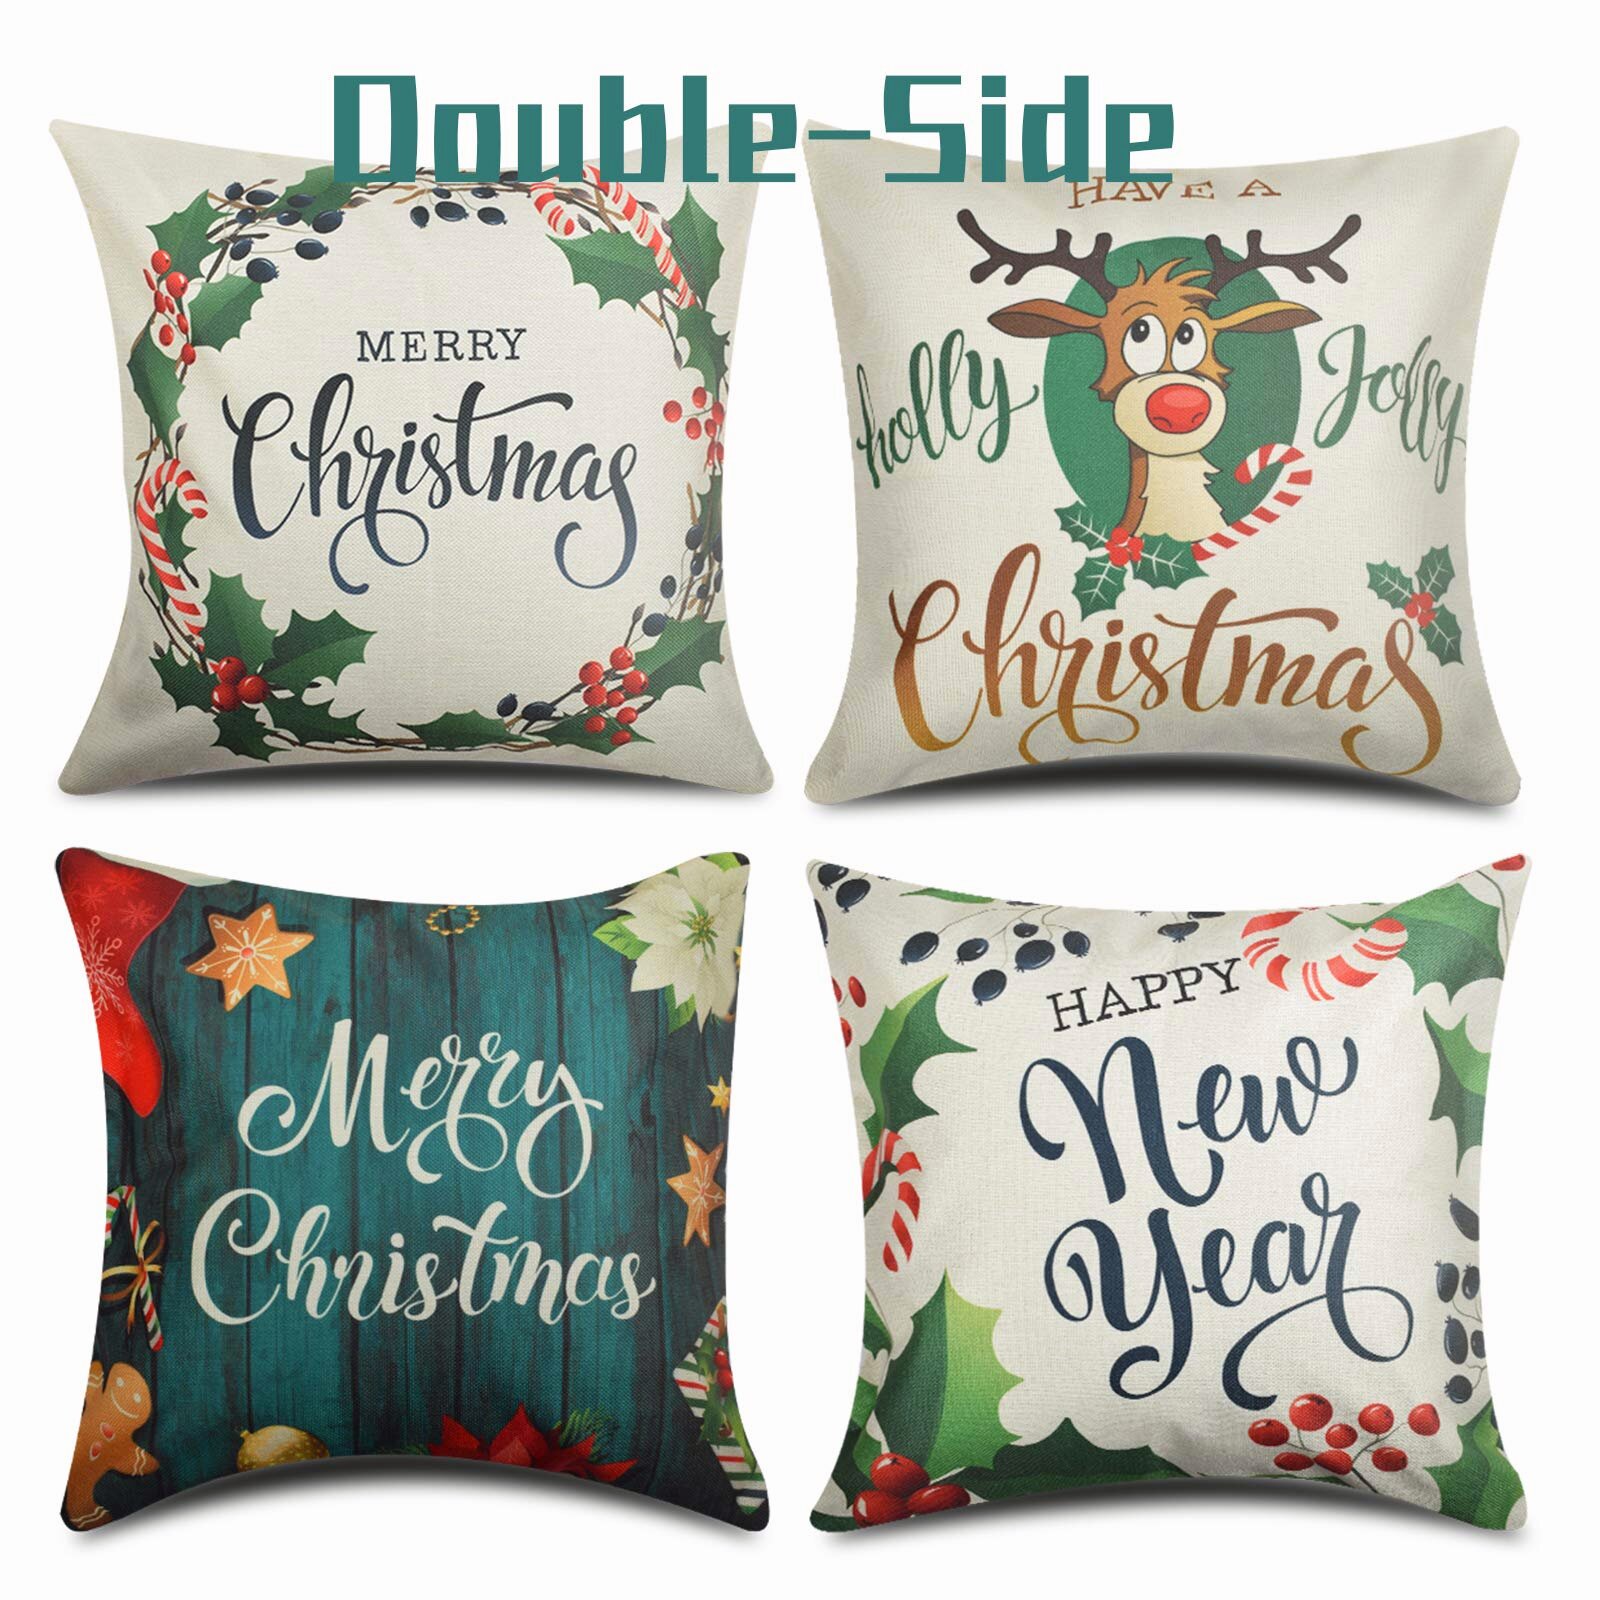 Christmas Decorations Farmhouse Decor Christmas Throw Pillow18 x 18 Inch Winter Holiday Rustic Farmhouse Linen Cushion Case for Sofa Couch Nature Christmas Pillows Merry Christmas Pillow Cover